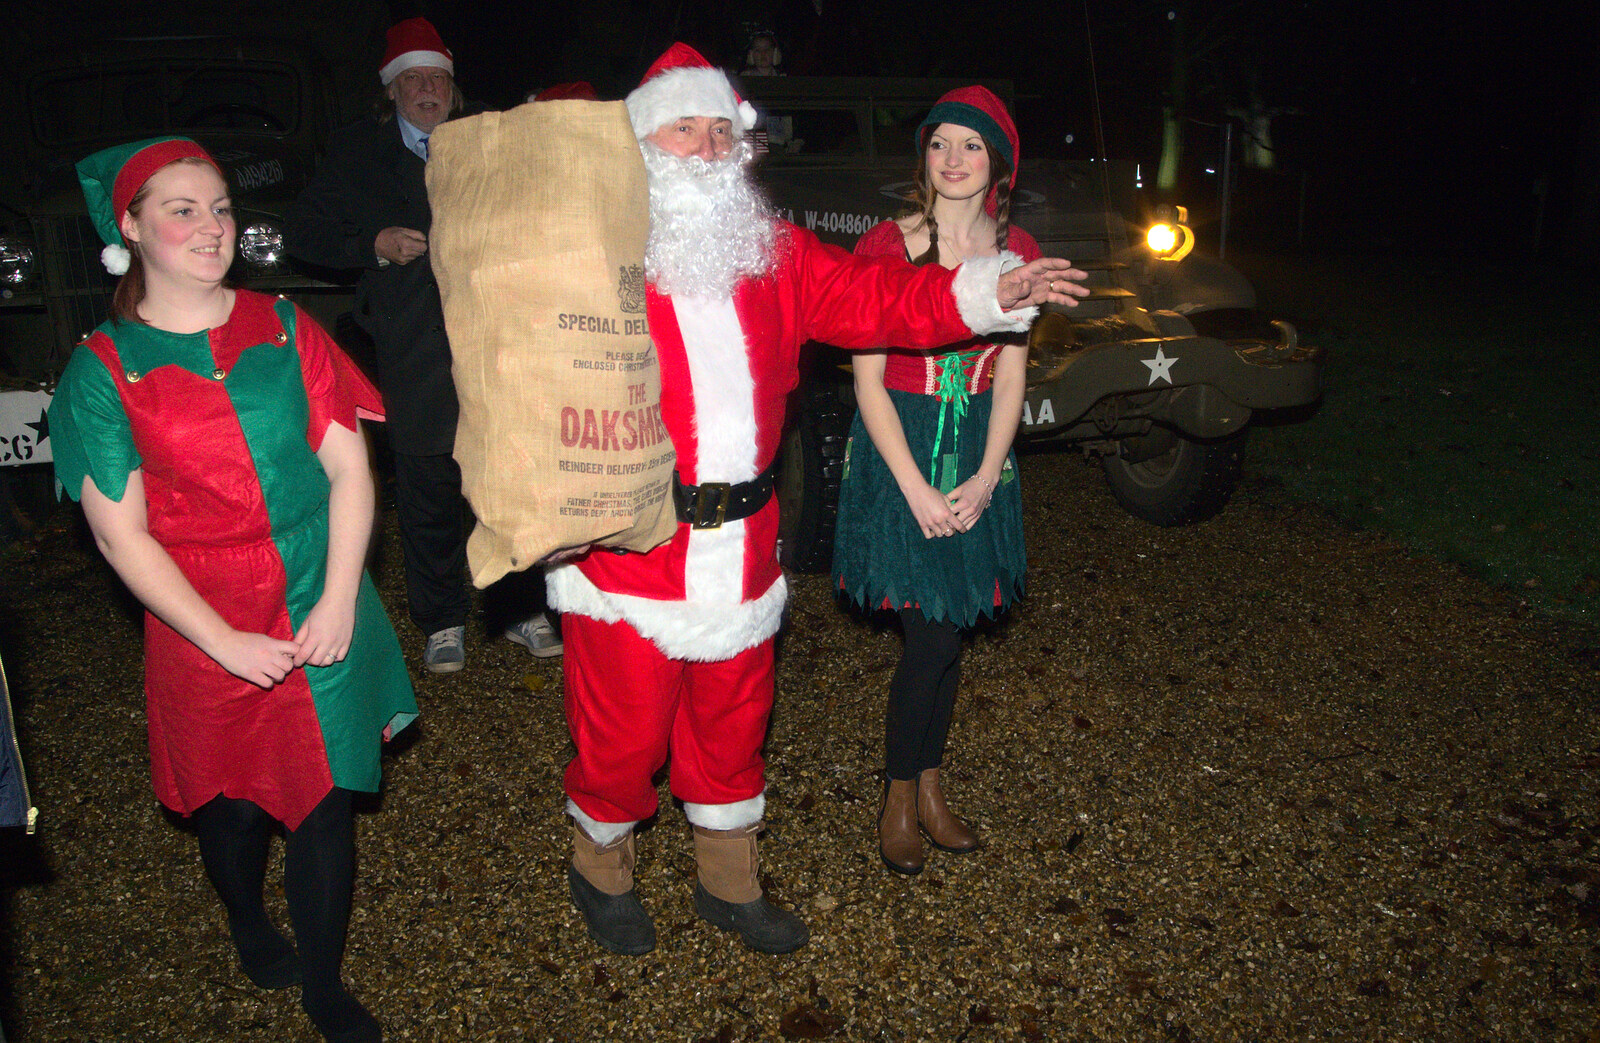 Santa and his elves from Rick Wakeman, Ian Lavender and the Christmas lights, The Oaksmere, Suffolk - 4th December 2014